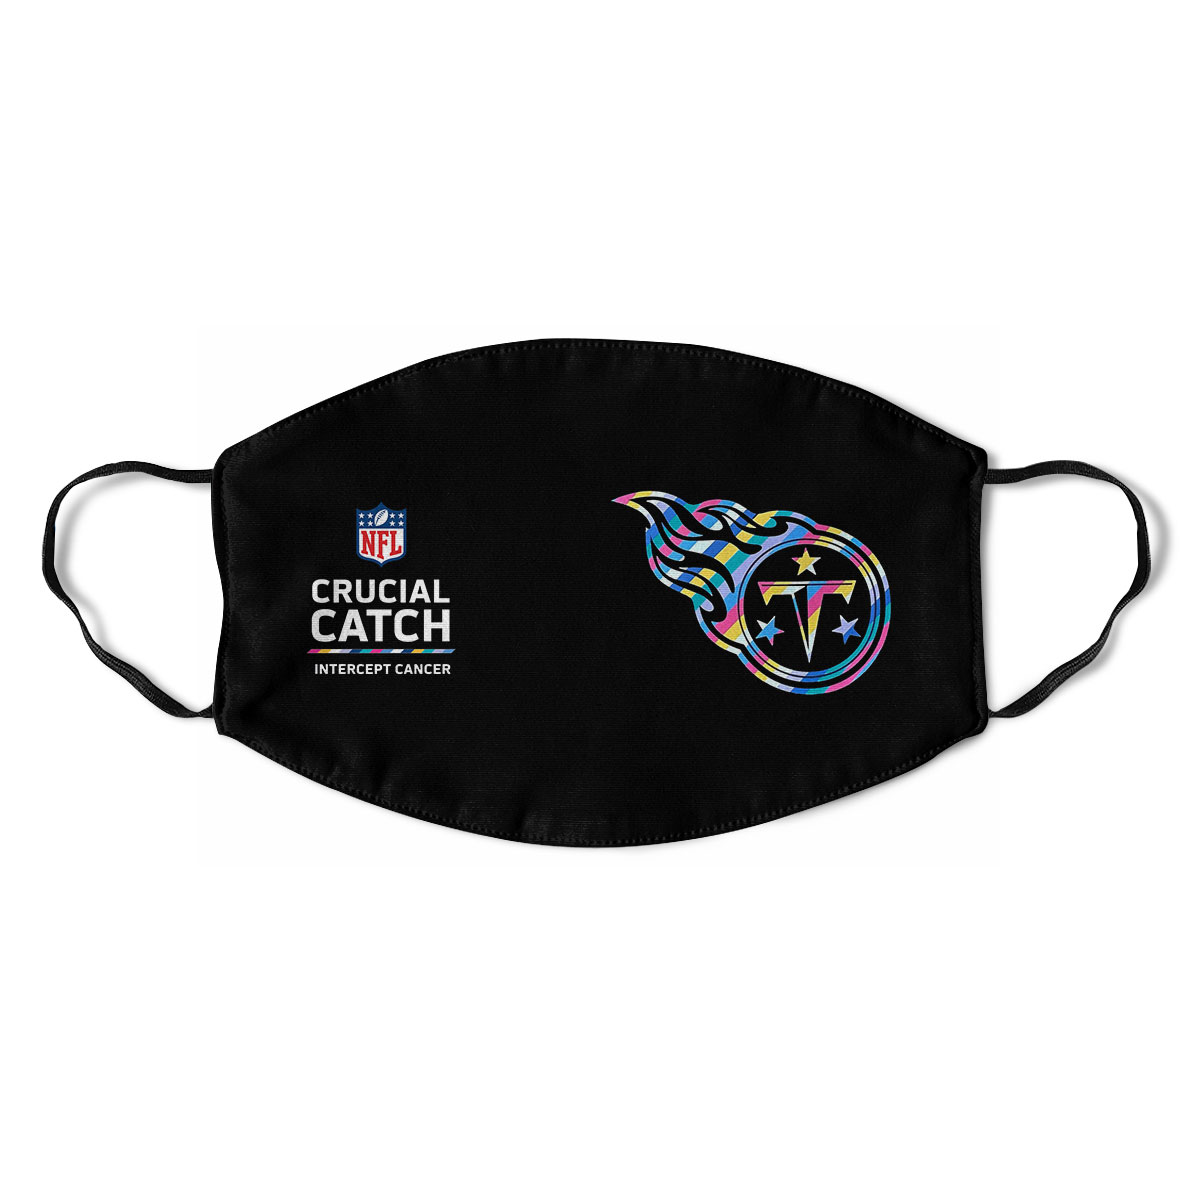 Tampa Bay Buccaneers Nfl Crucial Catch Multicolor Face Mask Anti-pollution